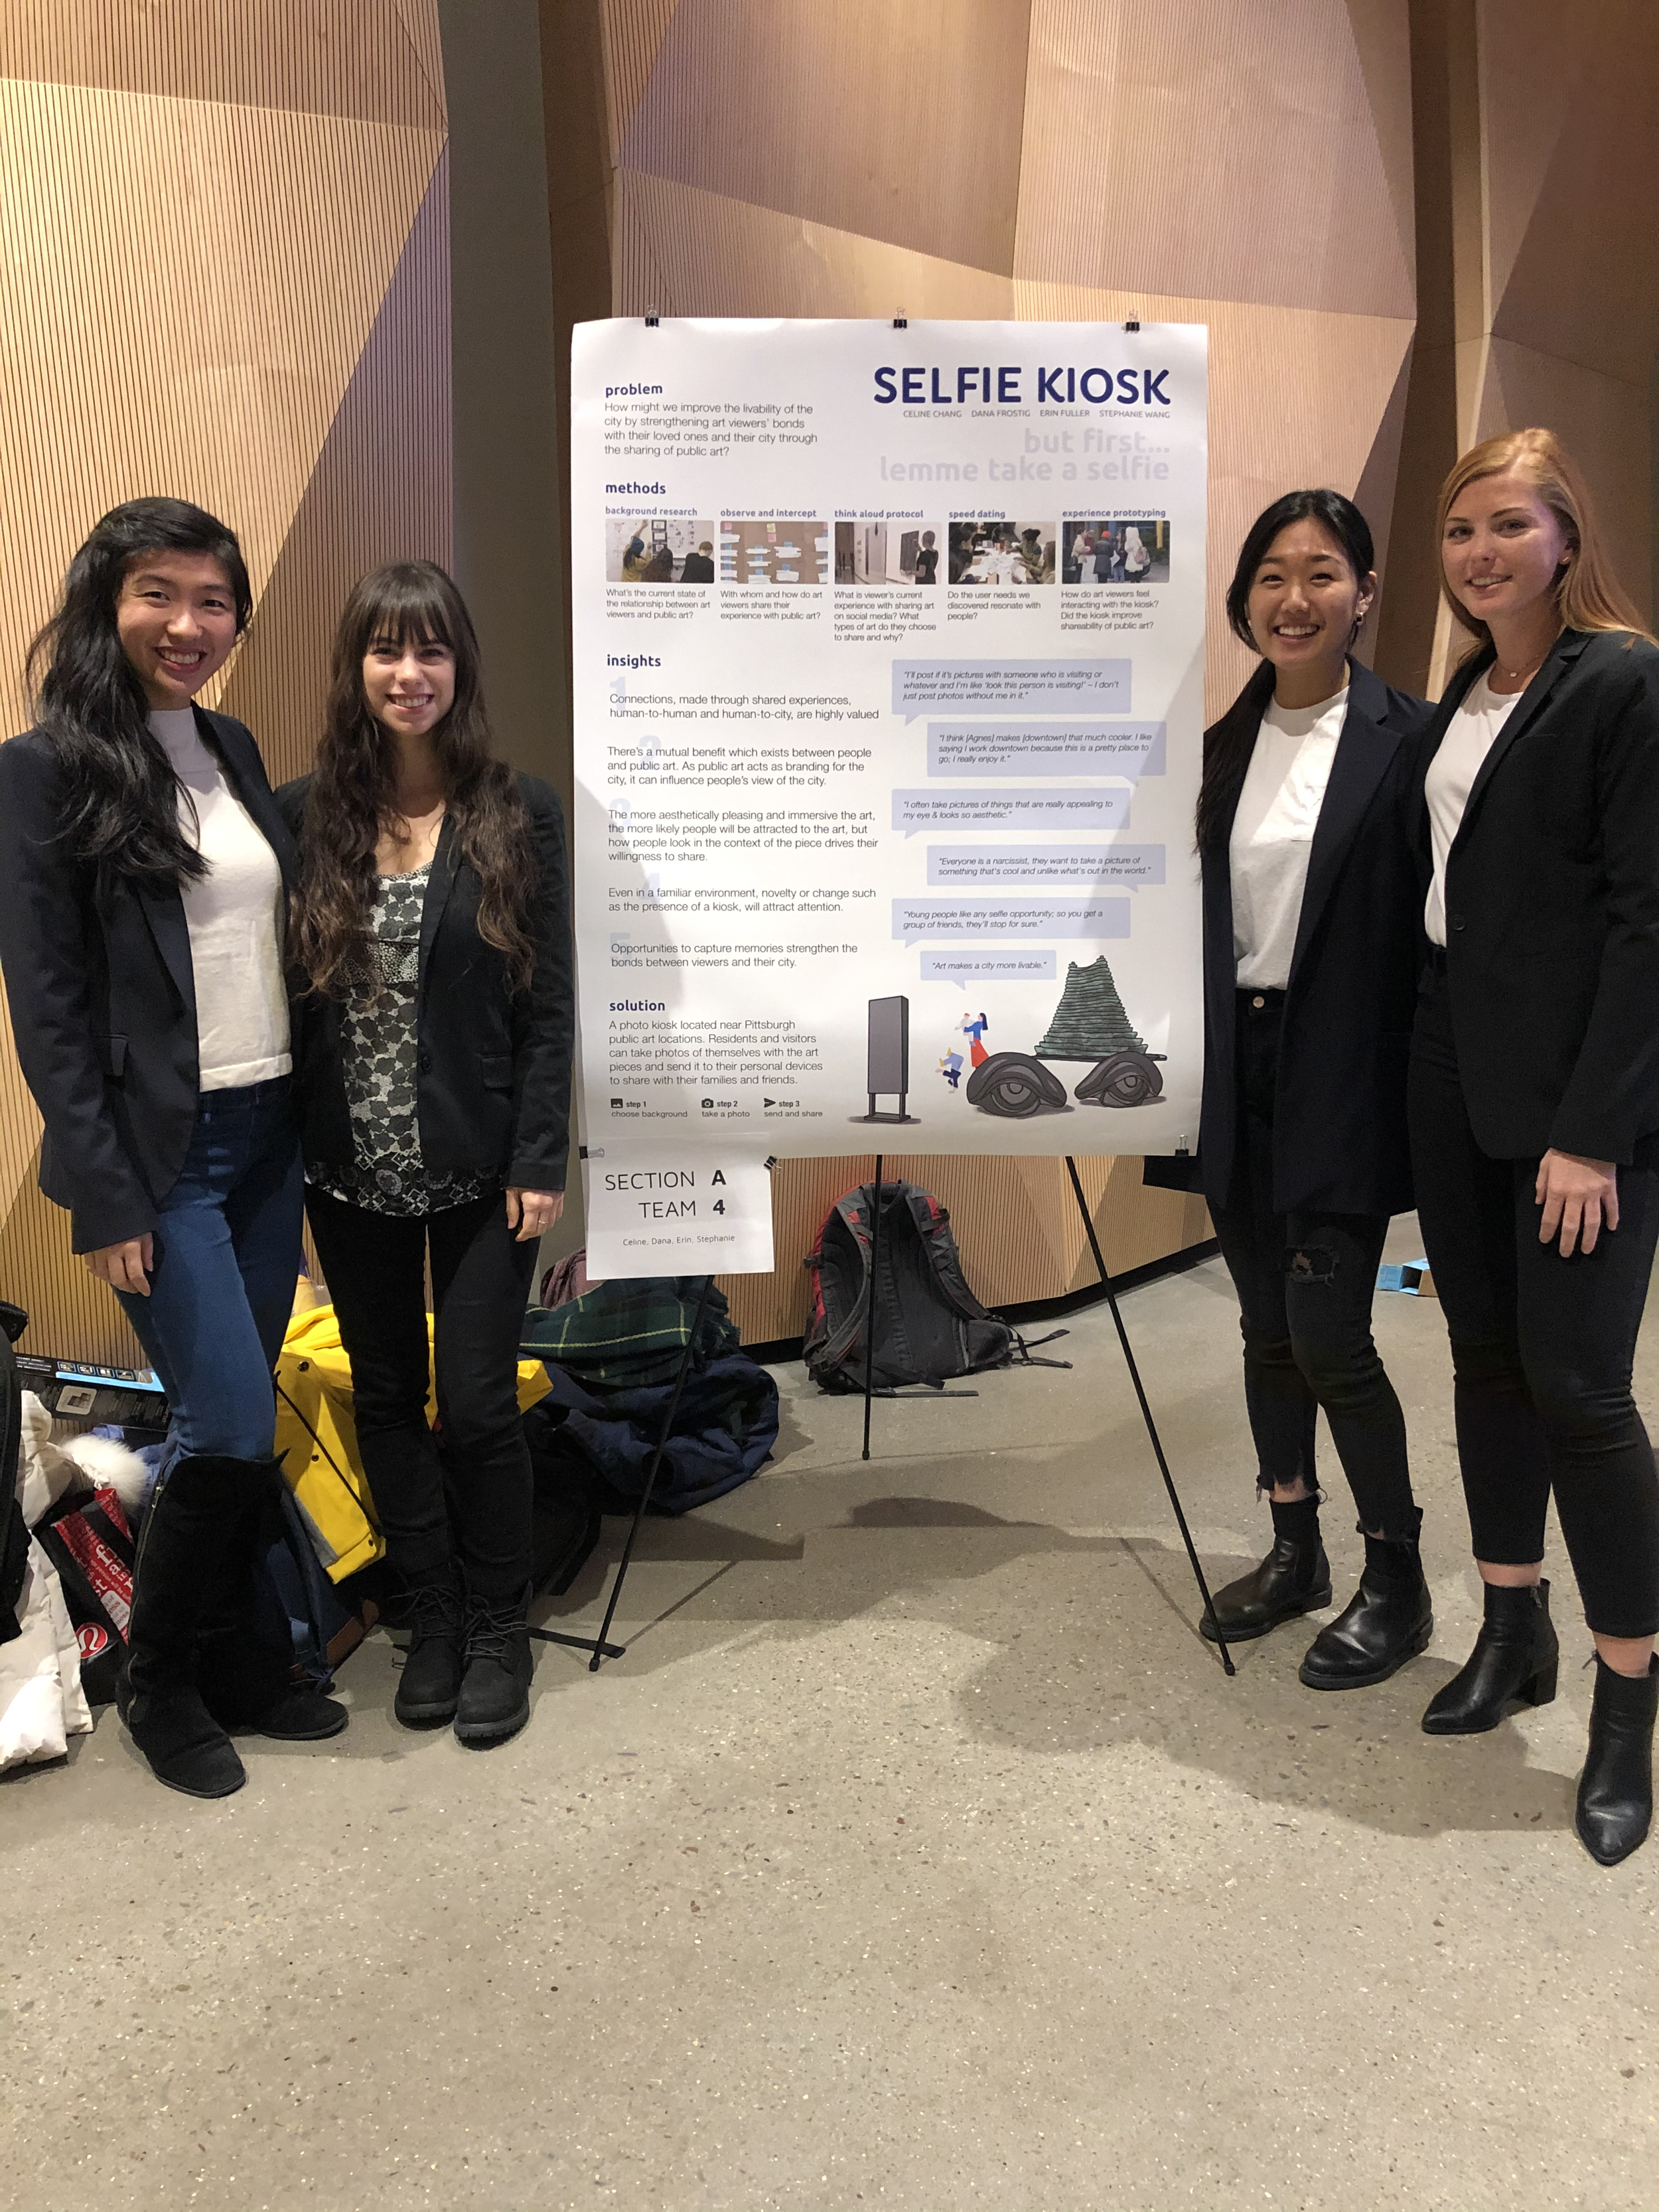  We showcased our solution with a poster presentation 